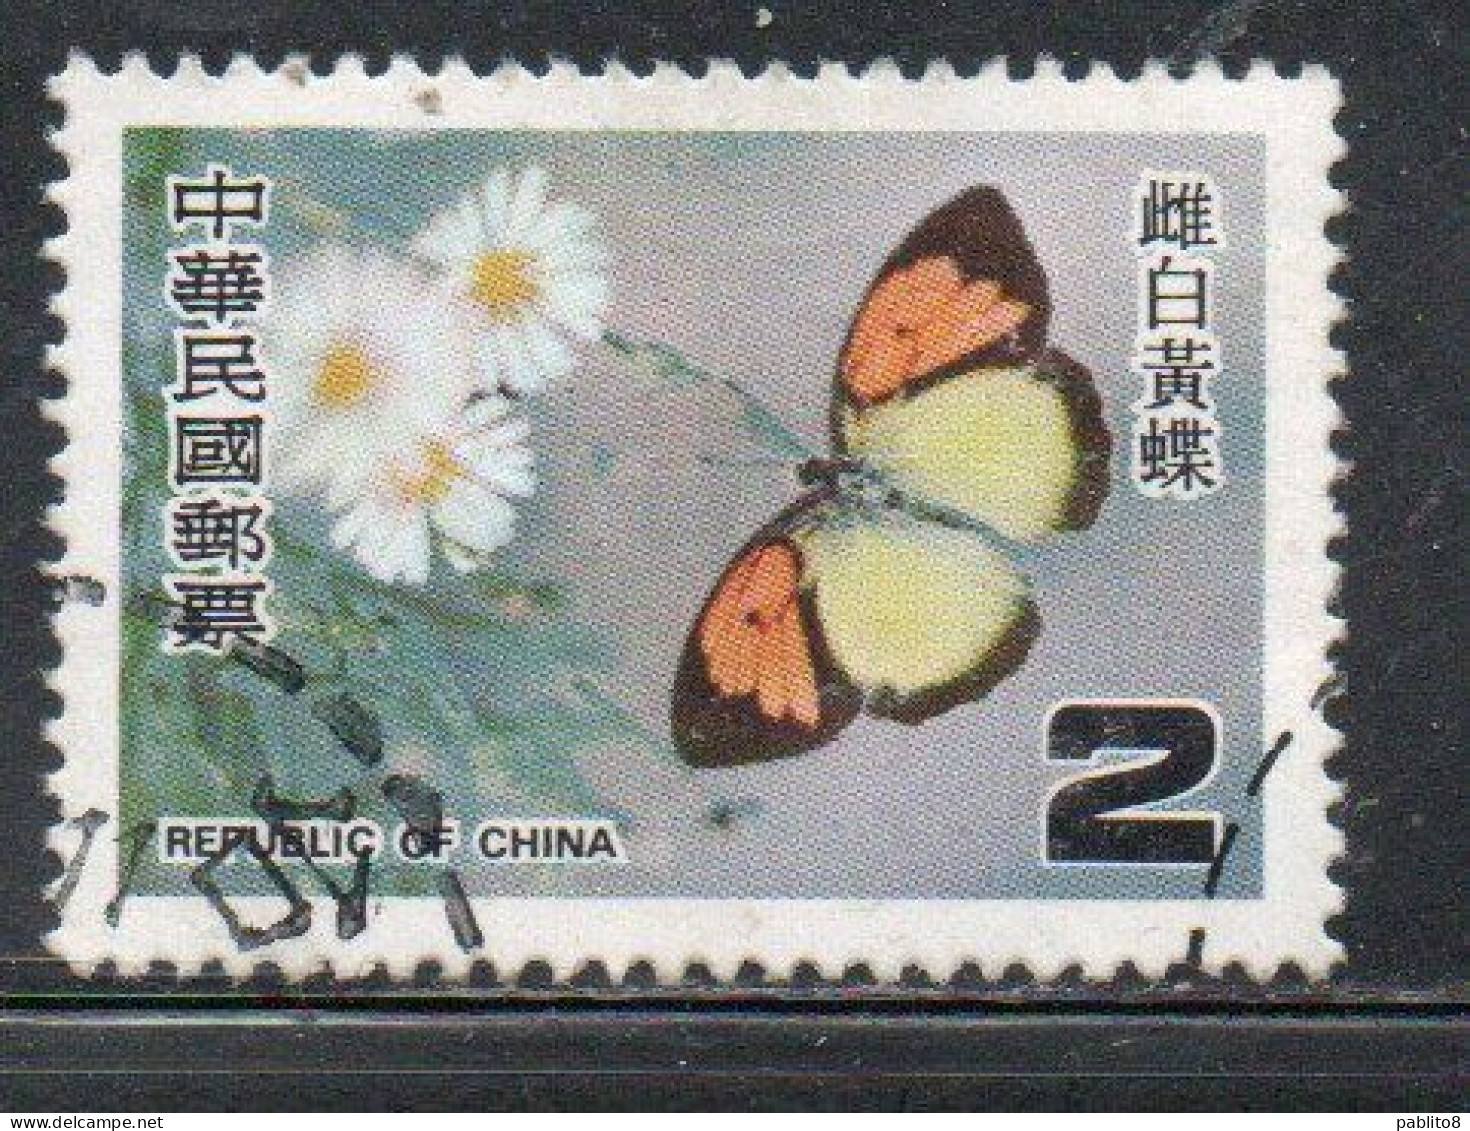 CHINA REPUBLIC CINA TAIWAN FORMOSA 1978 PROTECTED BUTTERFLIES IXIAS PYRENE BUTTERFLY 2$ USED USATO OBLITERE' - Used Stamps